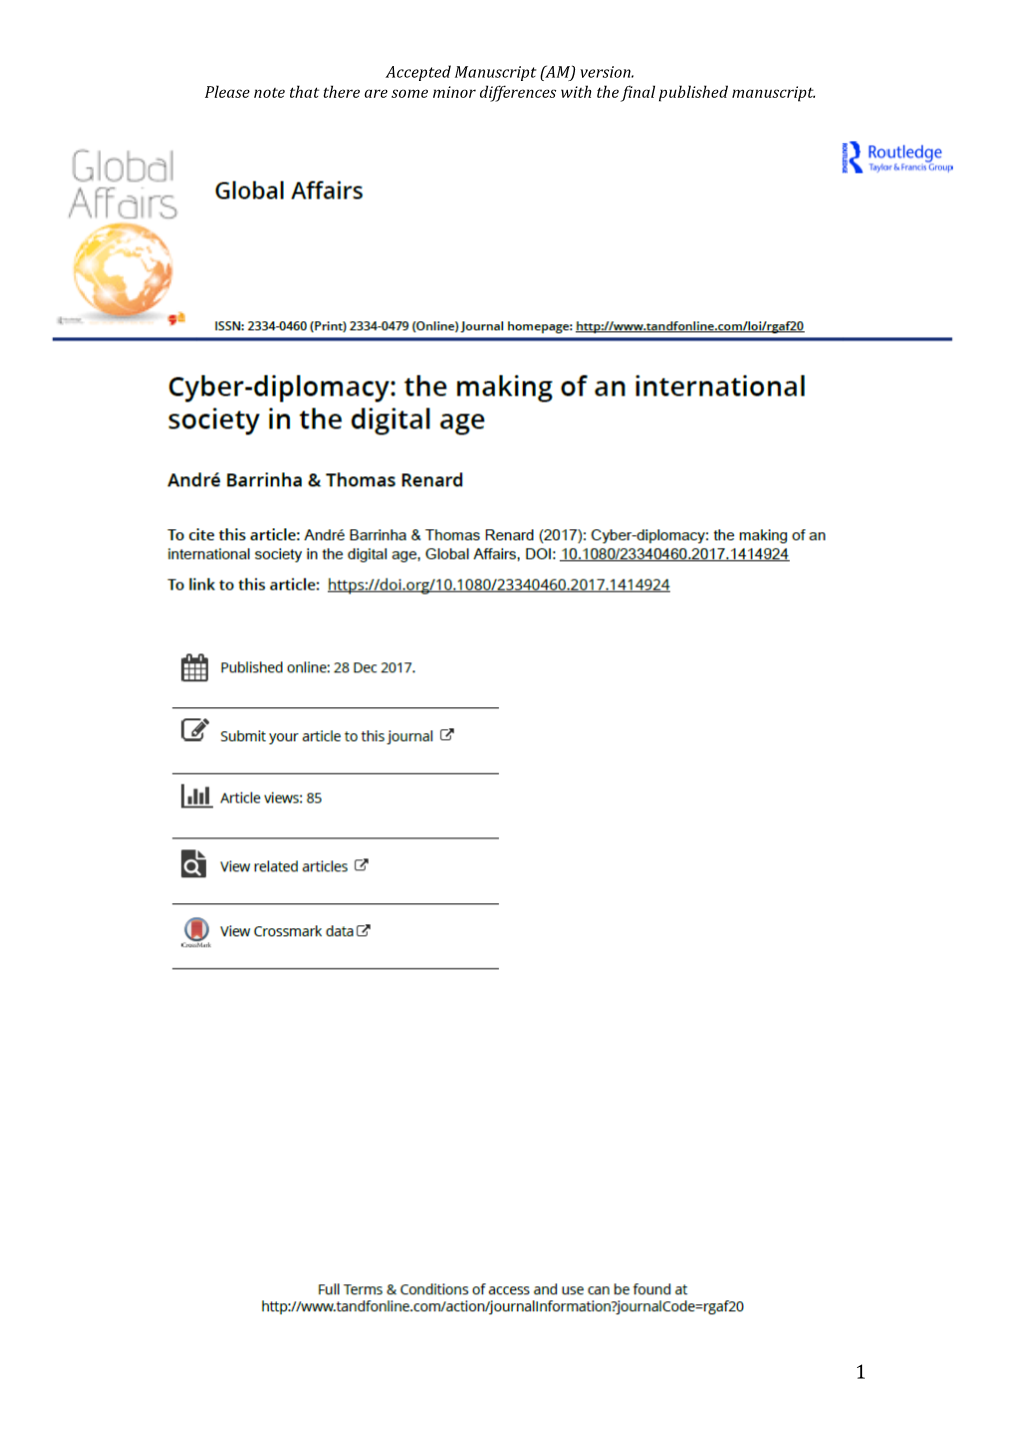 Cyber-Diplomacy: the Making of an International Society in the Digital Age1